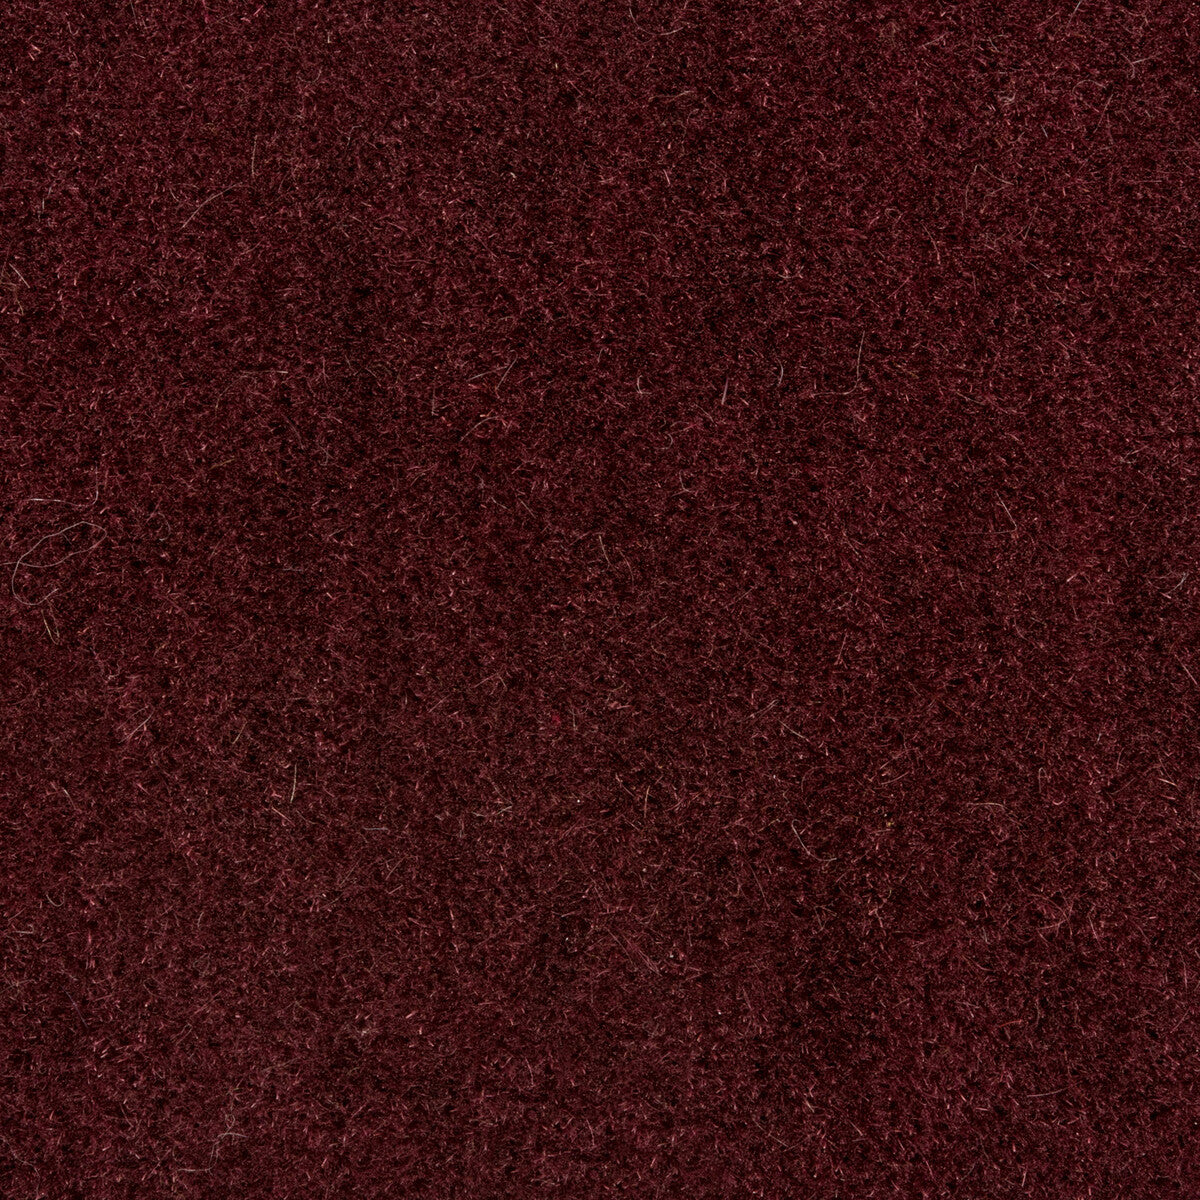 Bachelor Mohair fabric in cola color - pattern 8014101.610.0 - by Brunschwig &amp; Fils